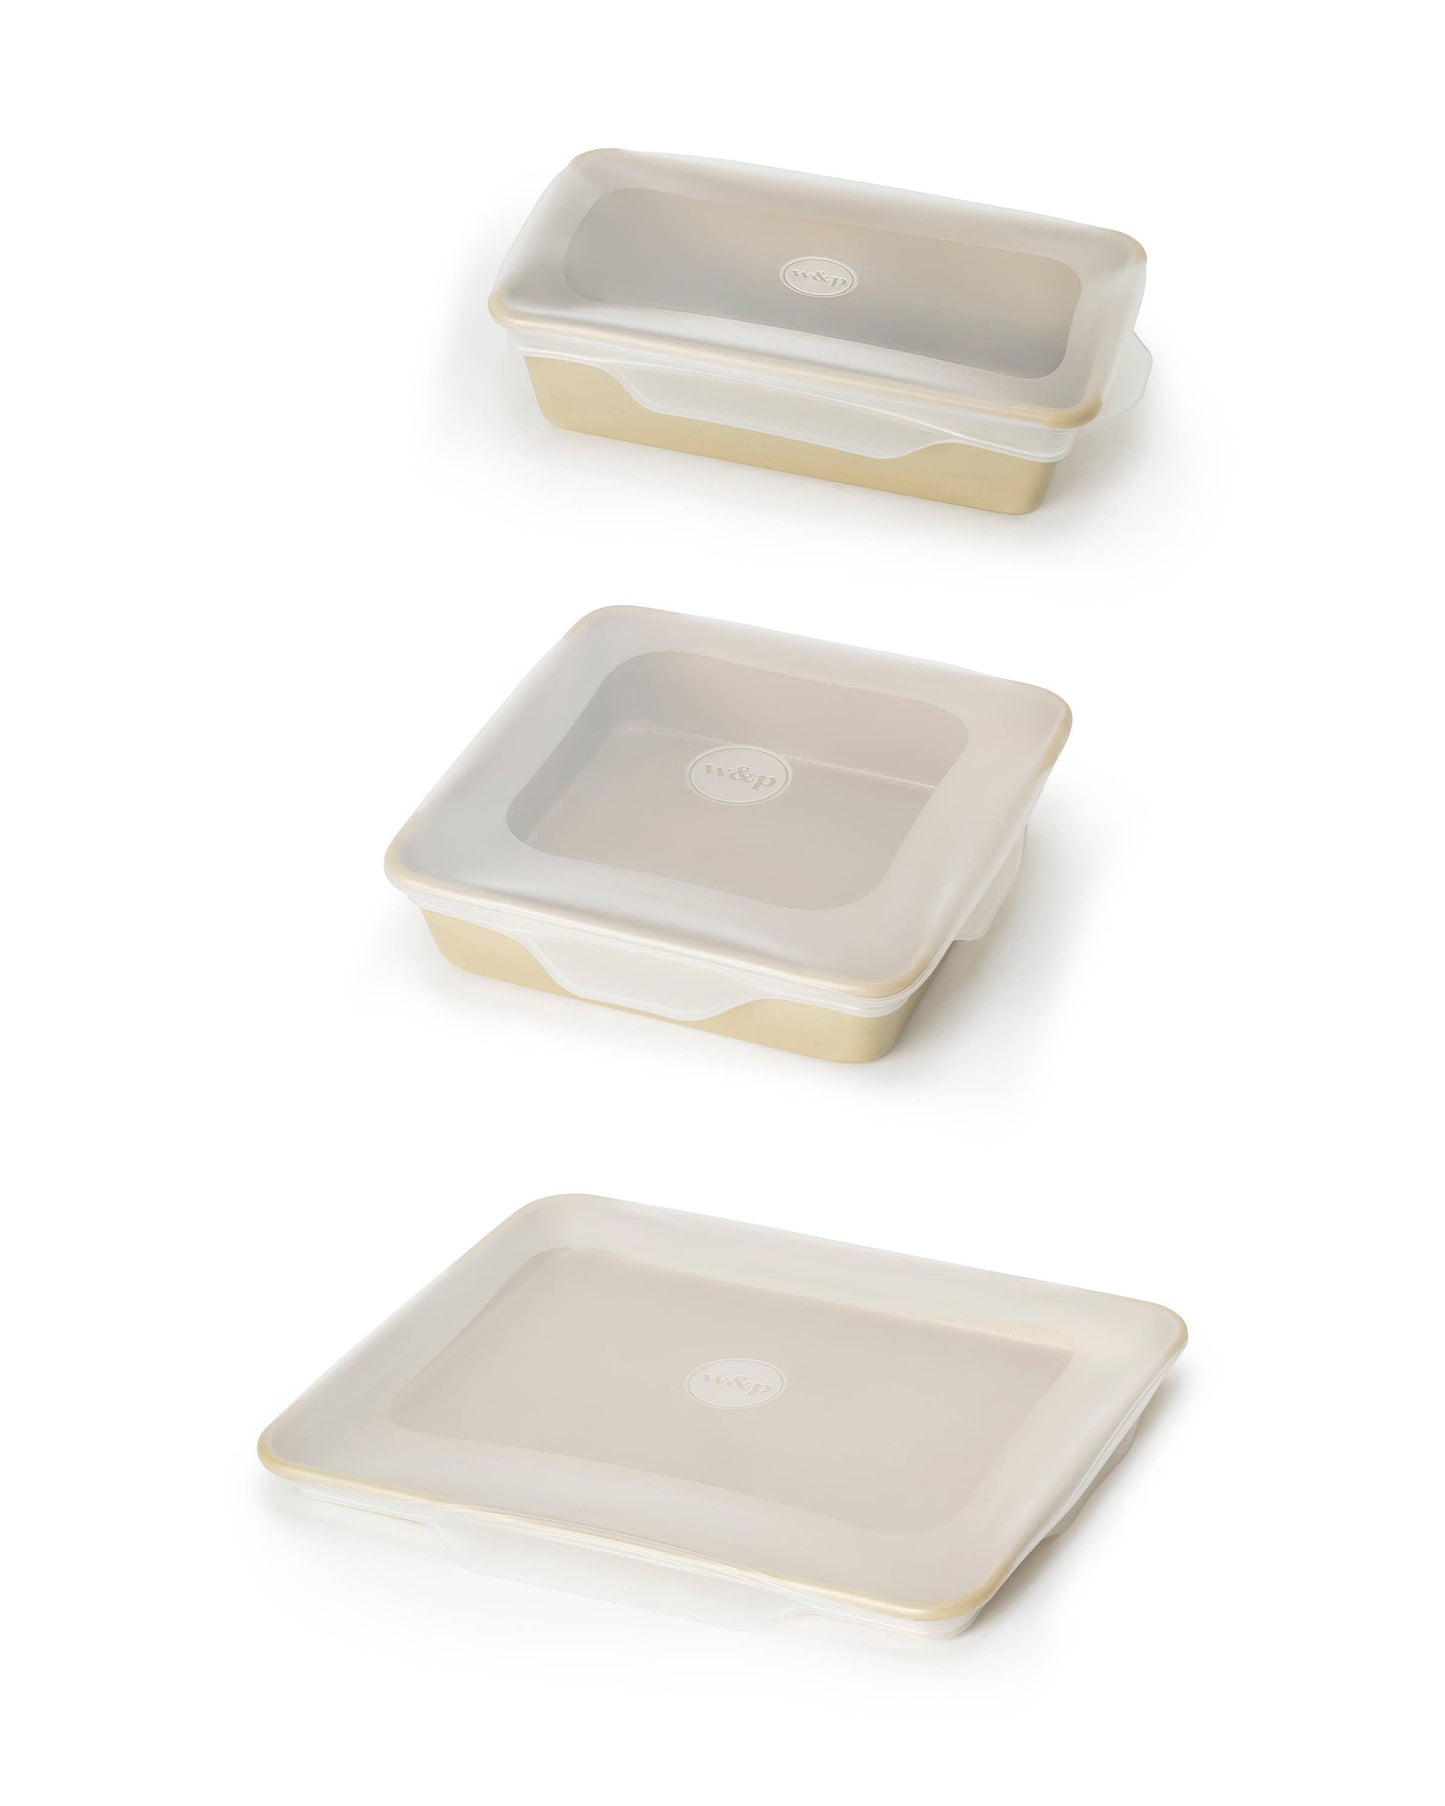 W&P - Reusable Silicone Stretch Baking Lids - Set of 3